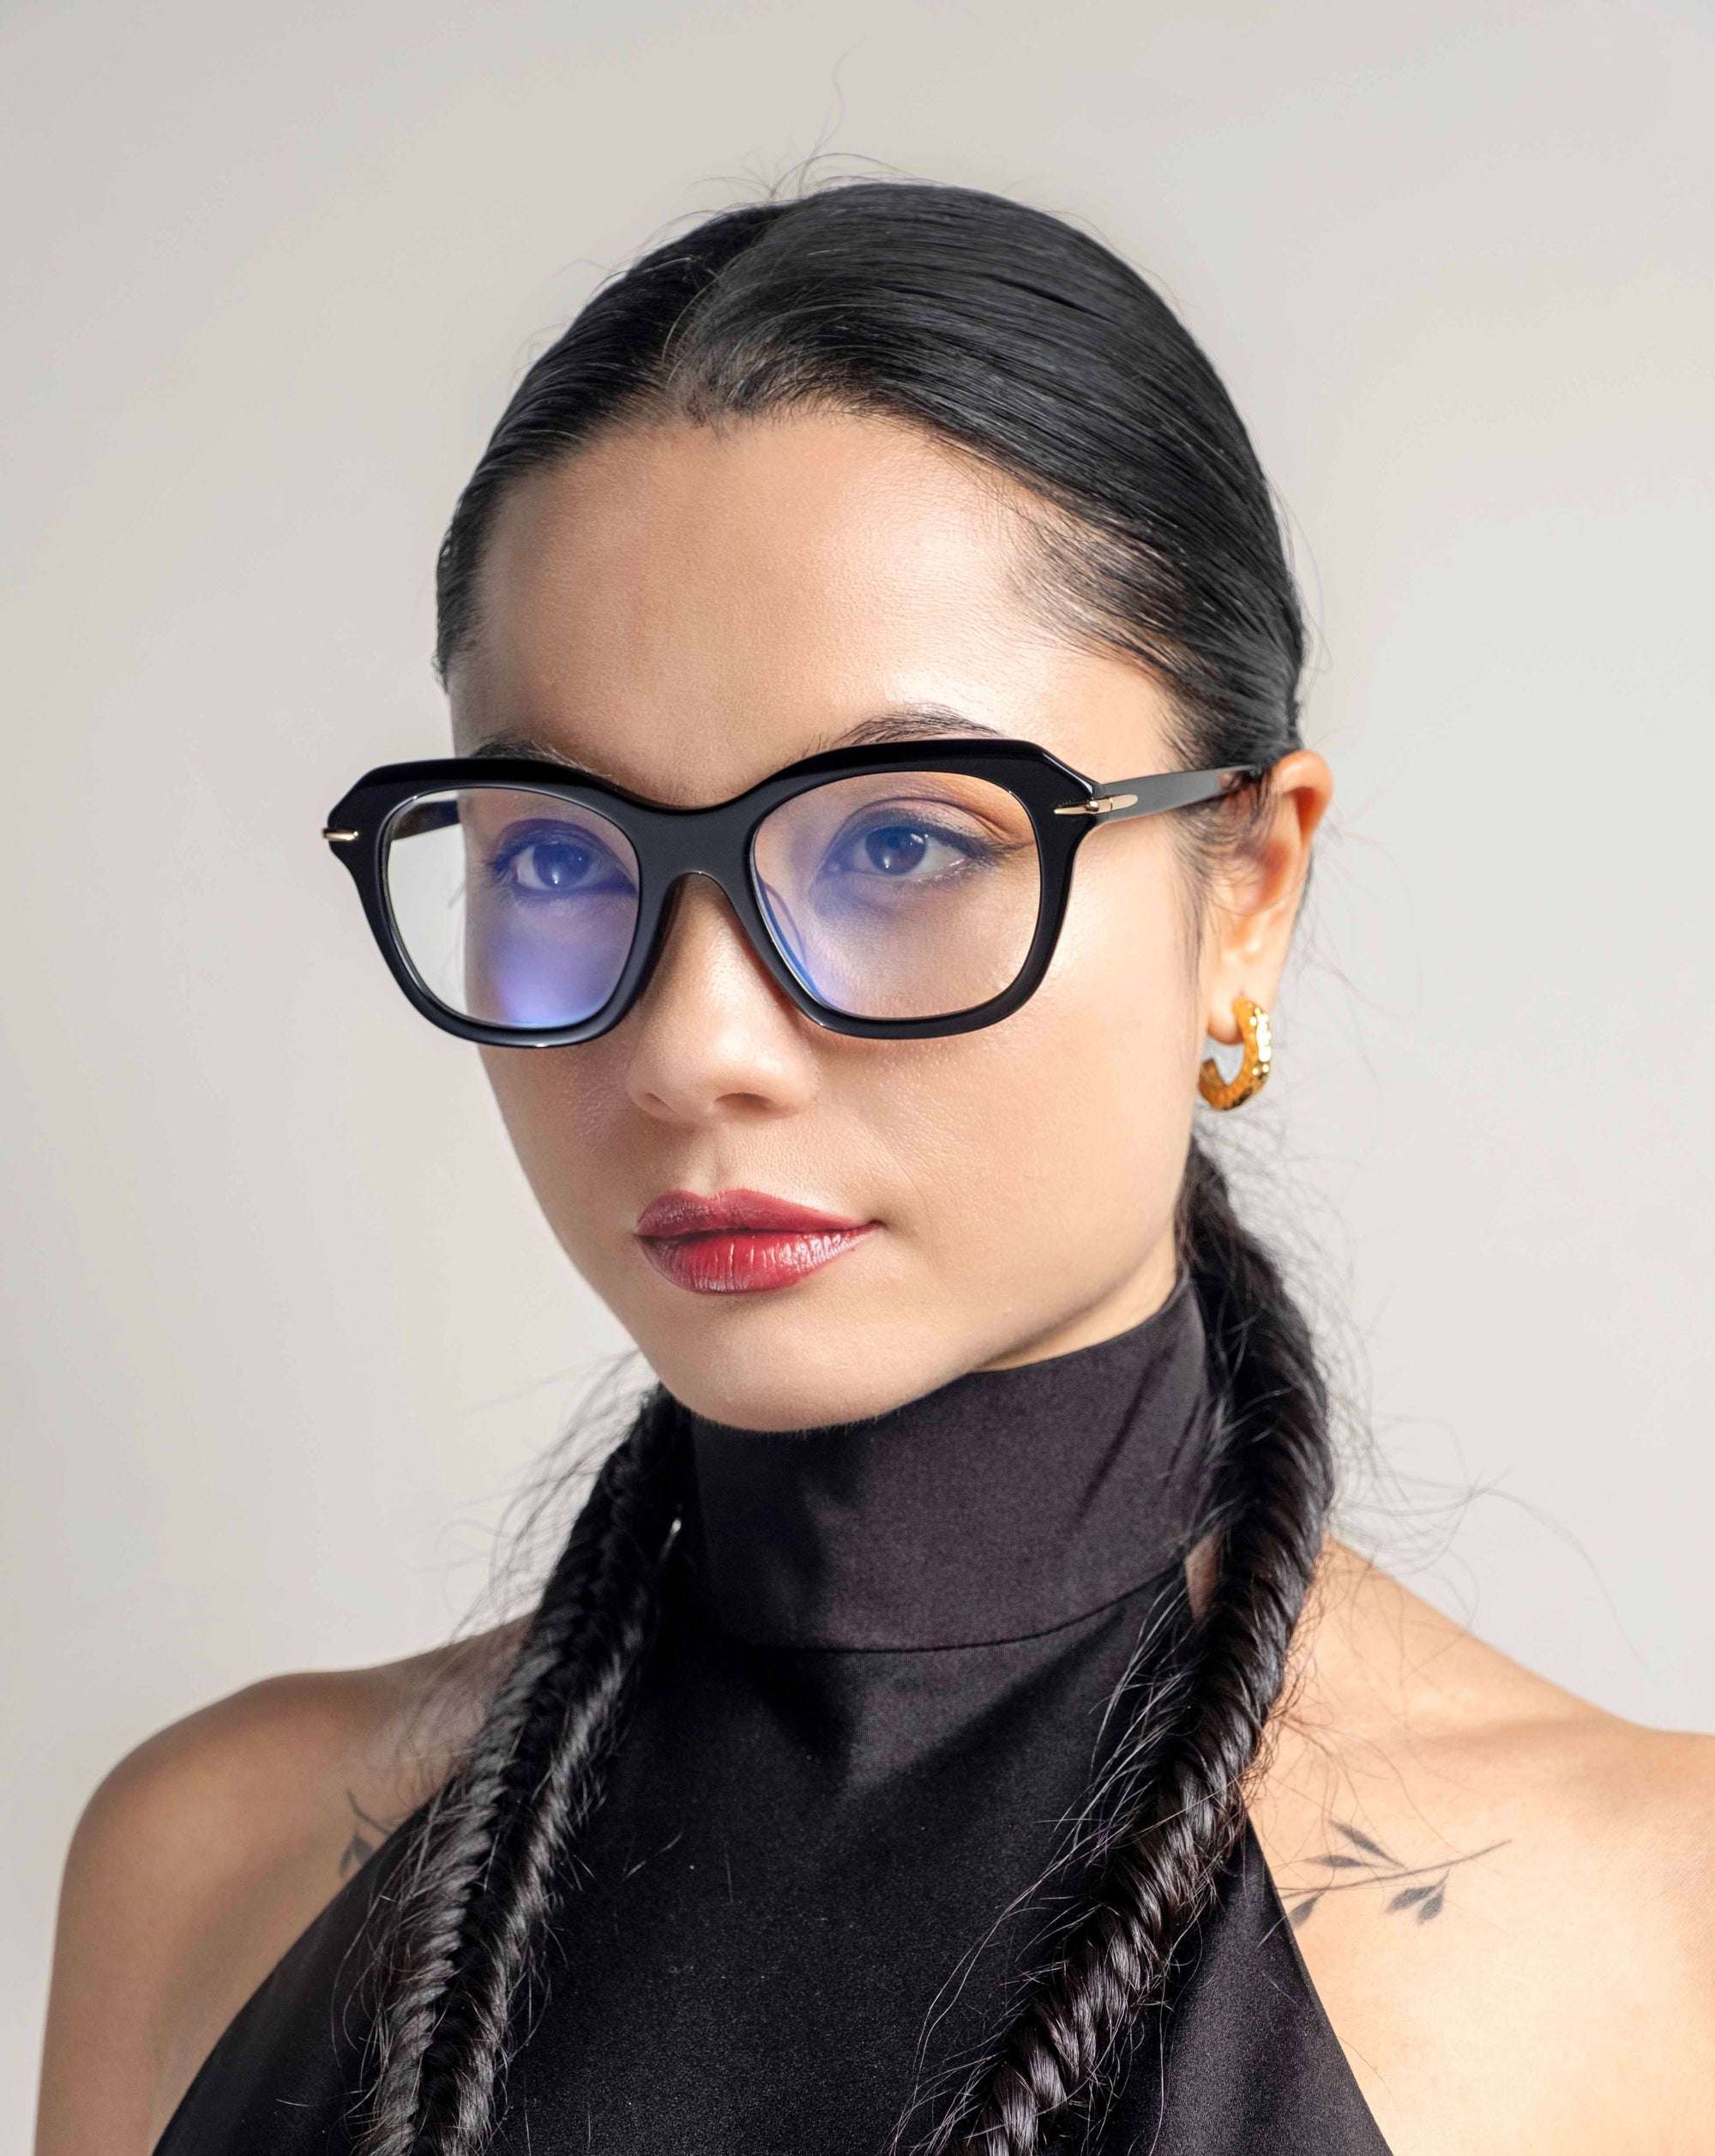 A person with long, dark hair styled in twin braids wears black-framed glasses with blue lenses. They are dressed in a black high-neck outfit and have small 18-karat gold-plated Helene hoop earrings by For Art's Sake®. The background is neutral, focusing attention on the person.